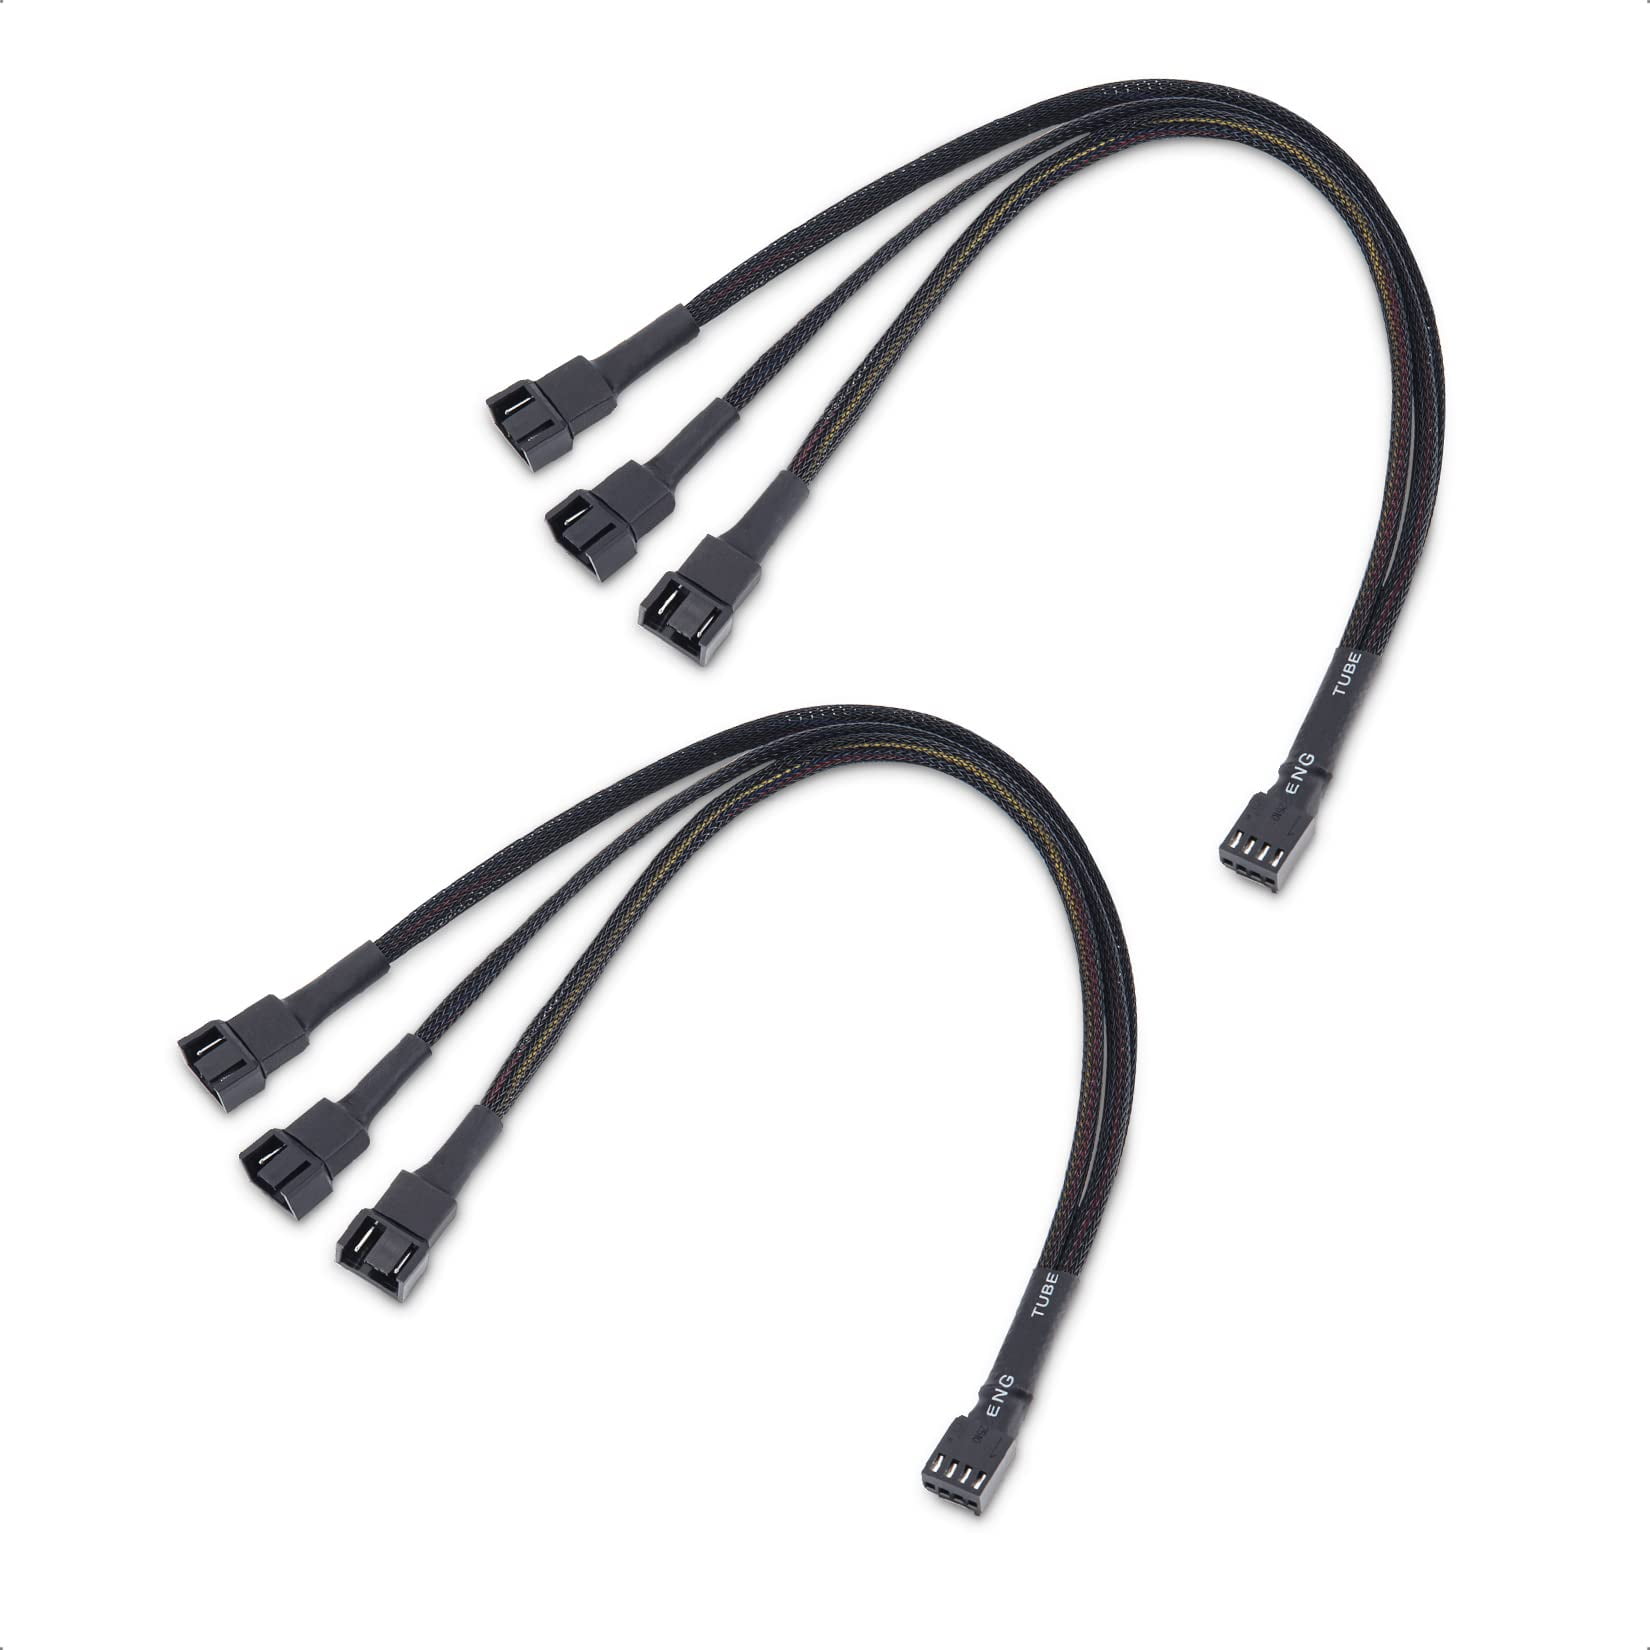 Rongsi 2-Pack 3 Way 4 Pin PWM Fan Splitter Cable - 12 inches for Computer  Cooling Fans 